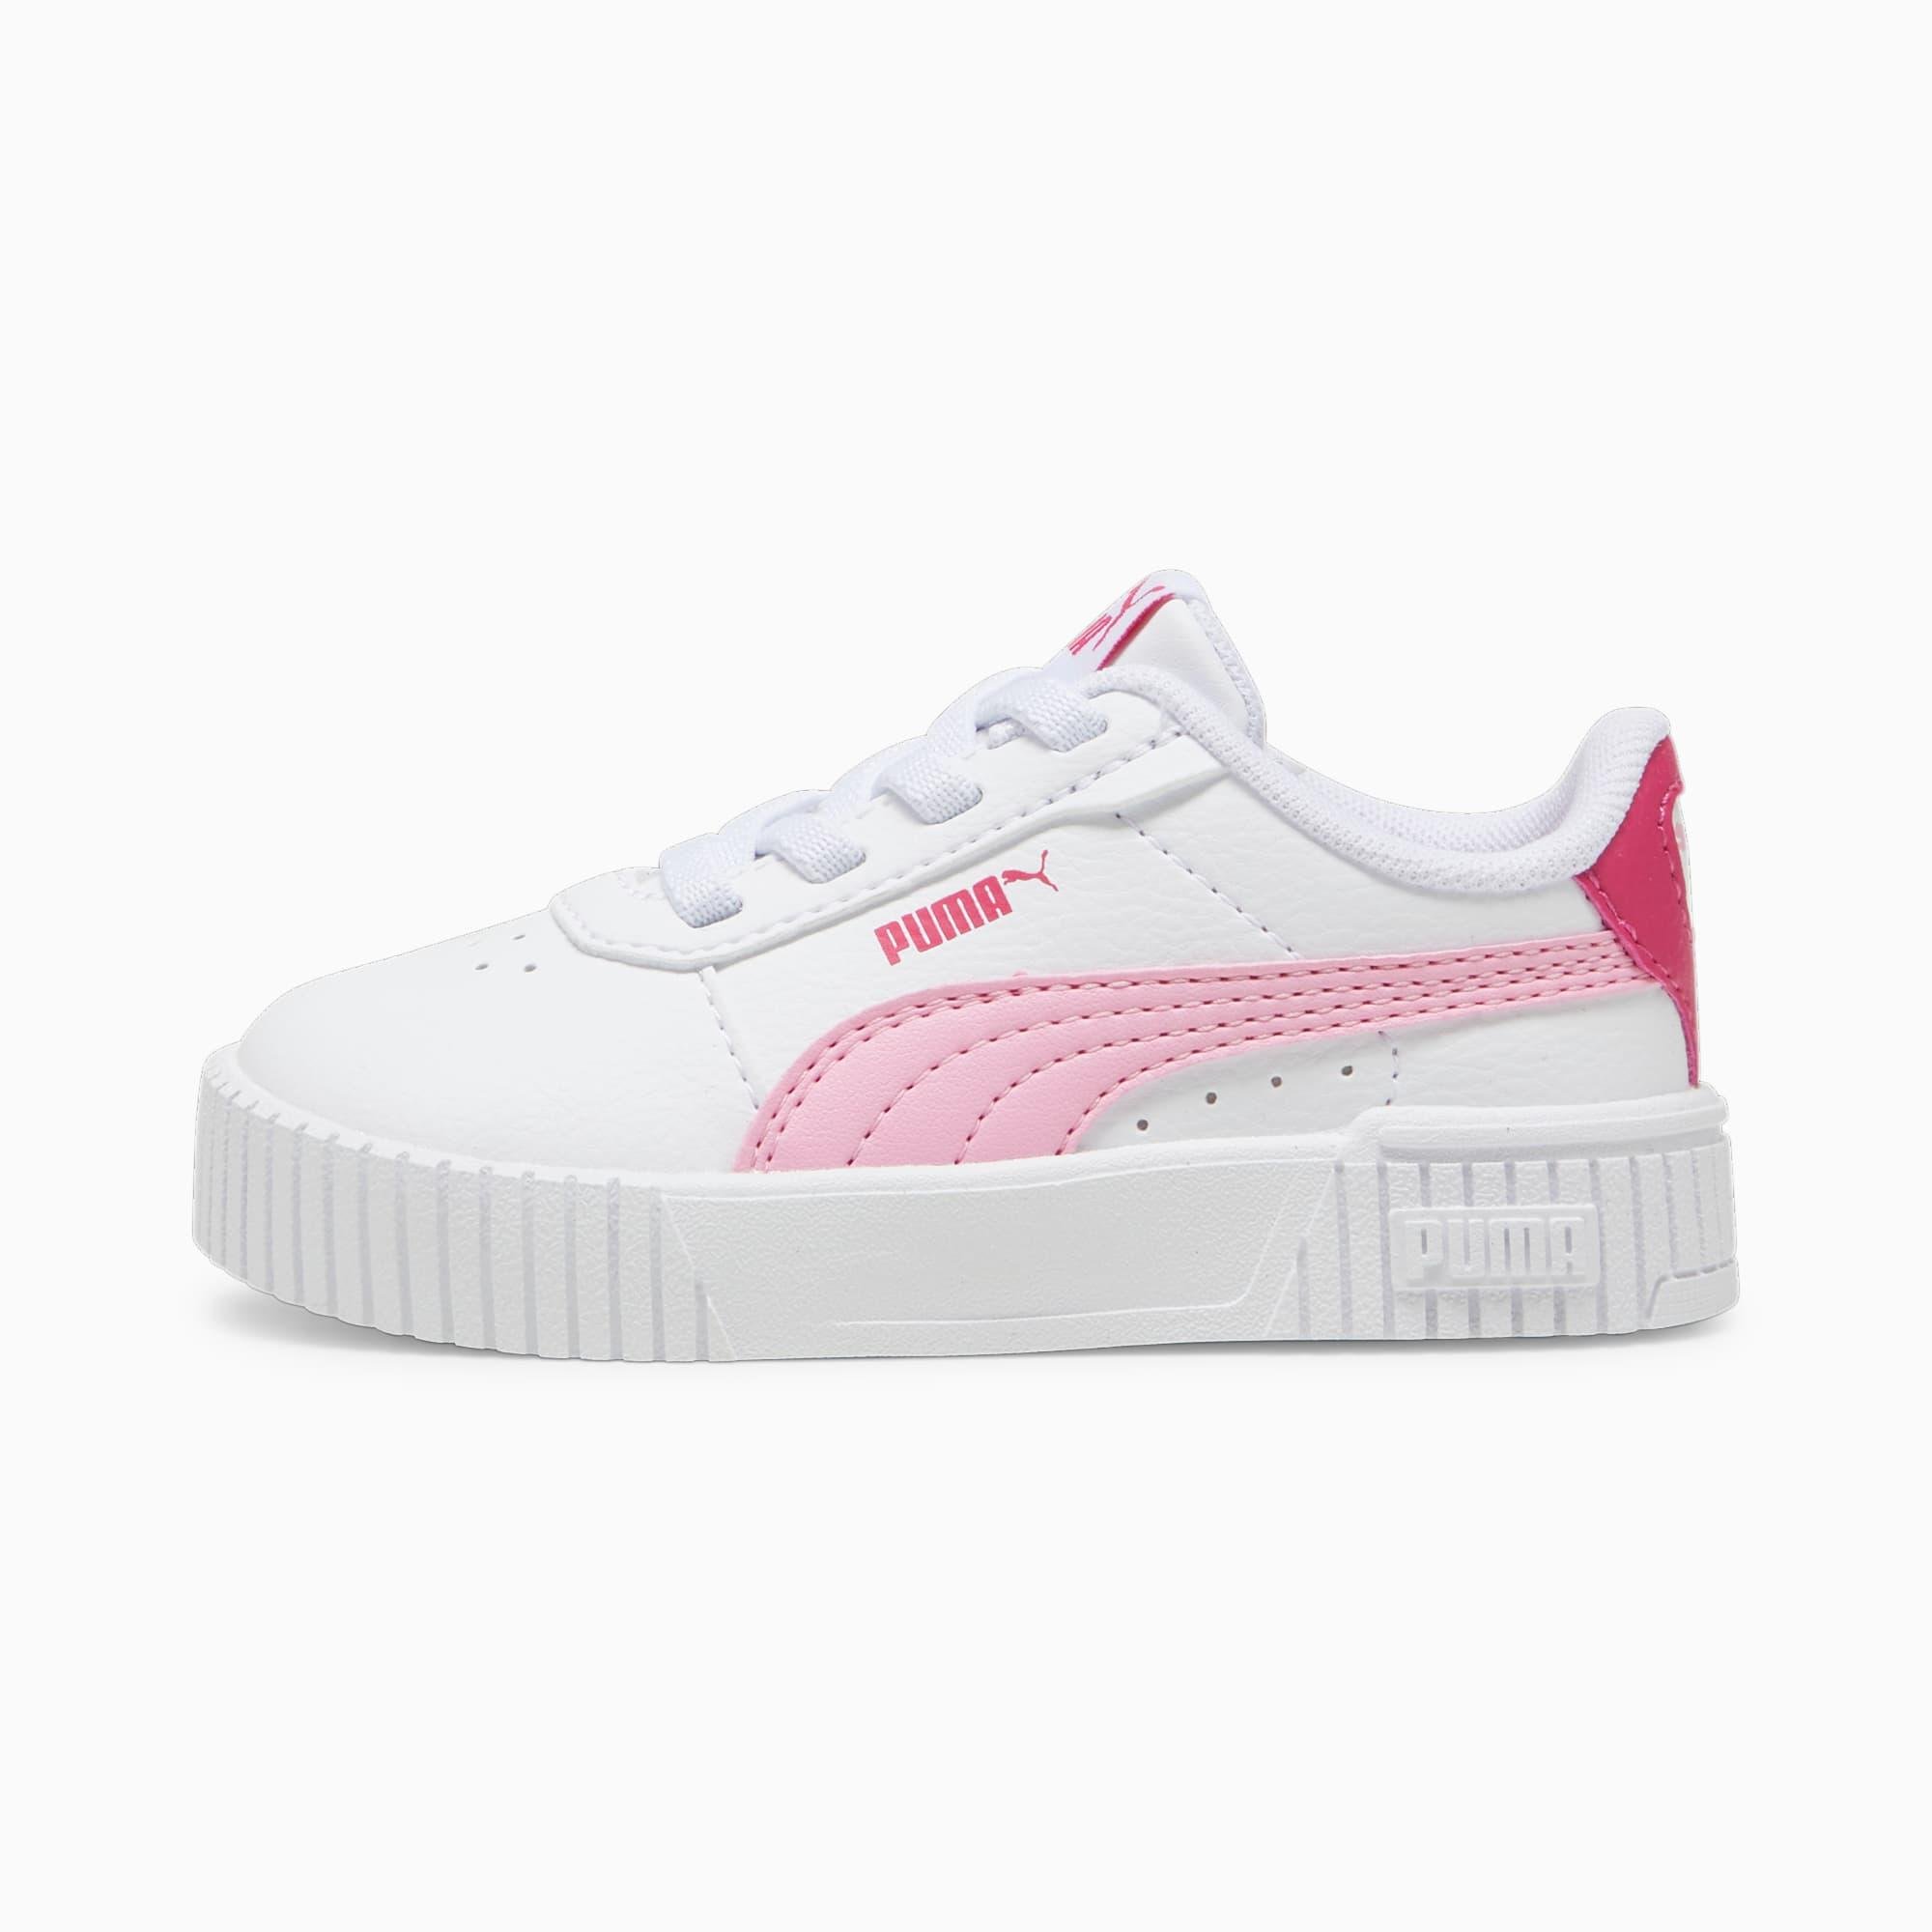 Carina 2.0 AC Toddler Shoes by PUMA